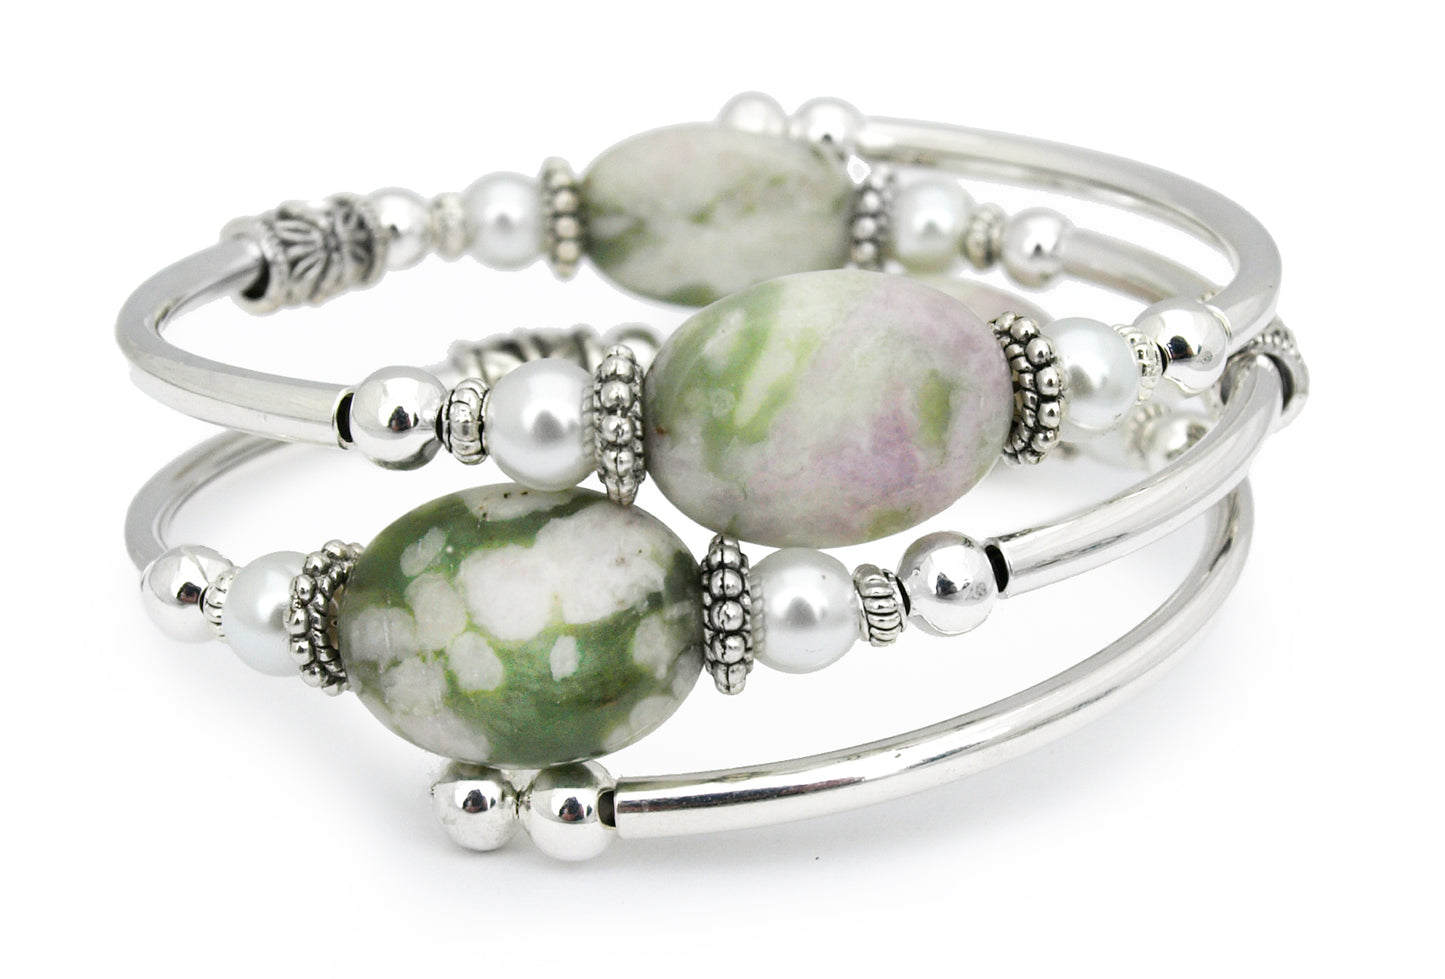 green, cream, and salmon colored oval gemstone on a silver bangle bracelet with white pearl accents, placed on a white background